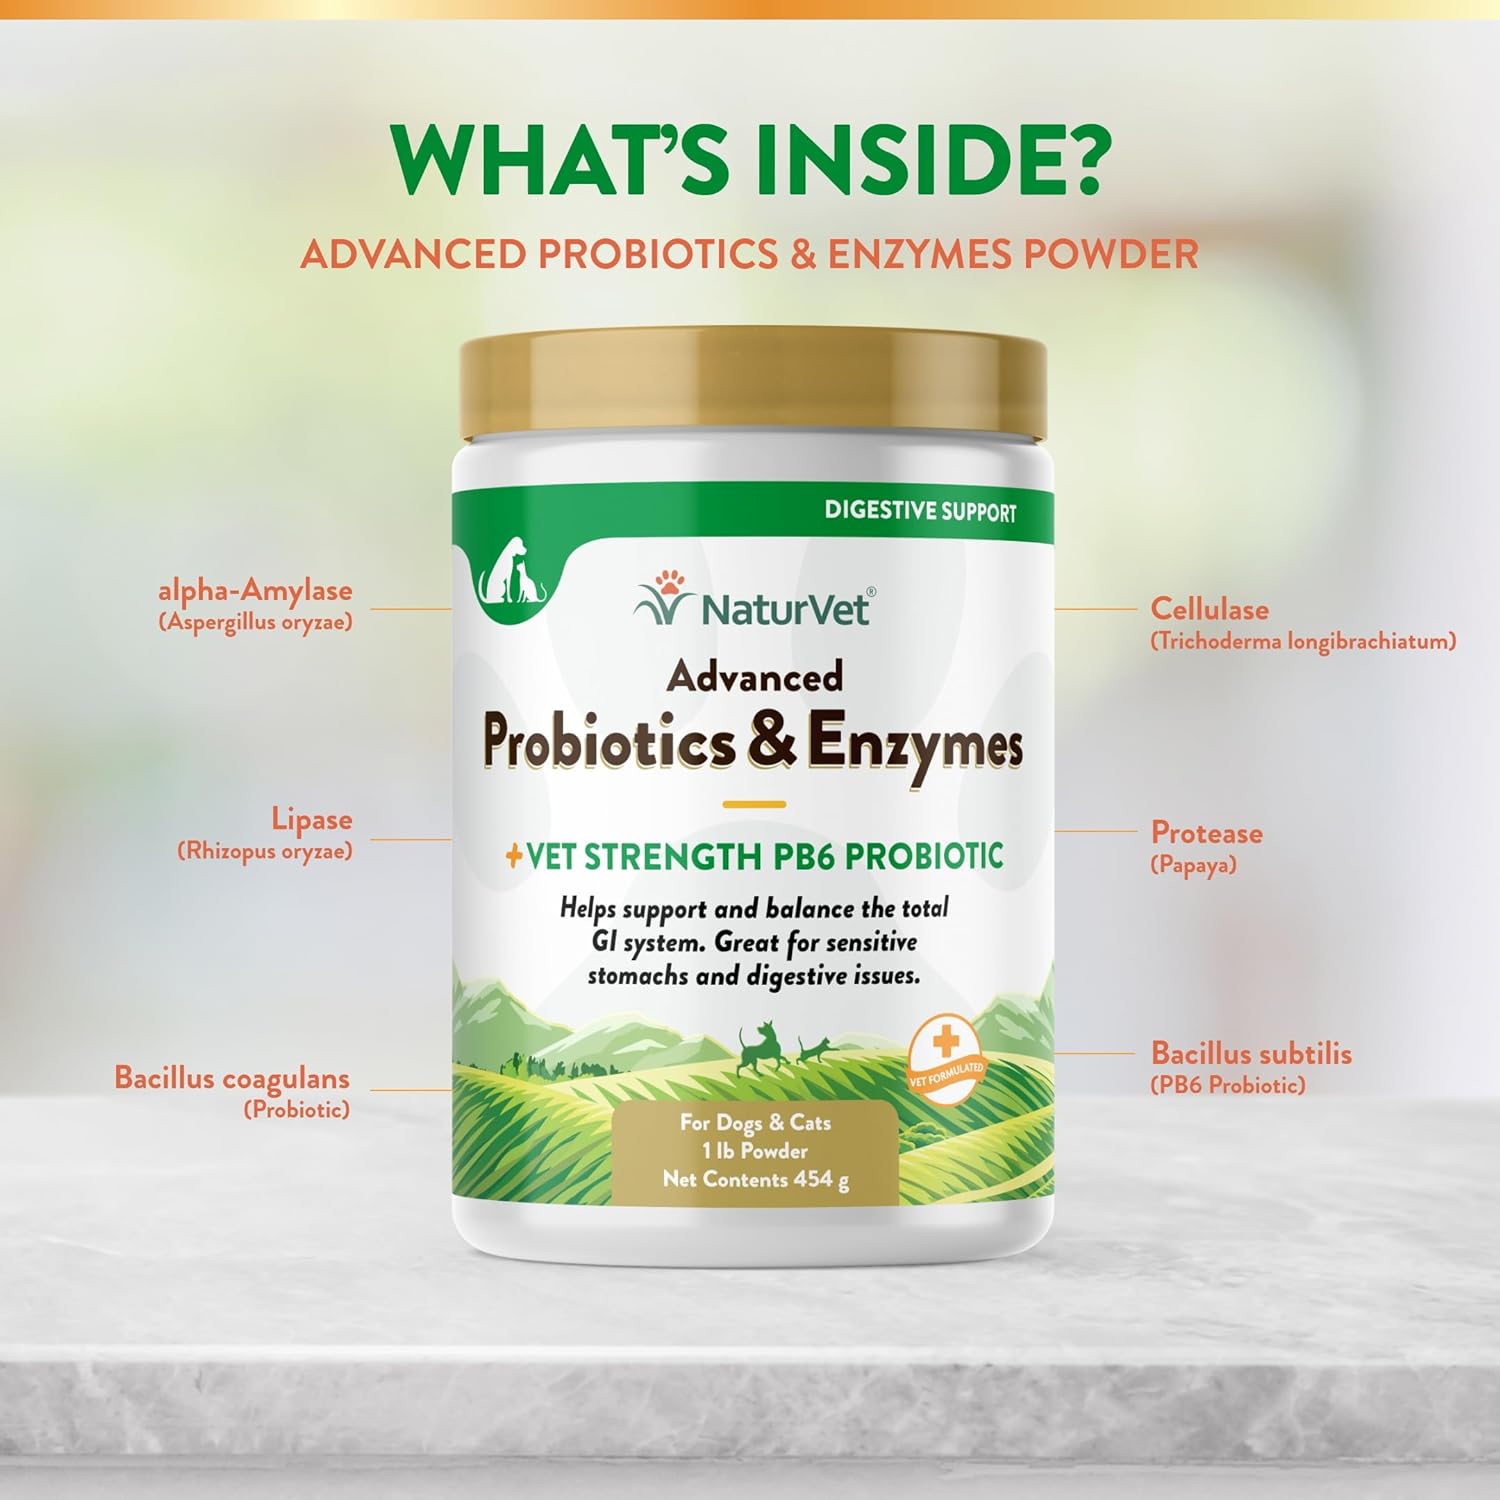 NaturVet – Advanced Probiotics & Enzymes - Plus Vet Strength PB6 Probiotic | Supports and Balances Pets with Sensitive Stomachs & Digestive Issues | for Dogs & Cats (1 lb) : Pet Supplies